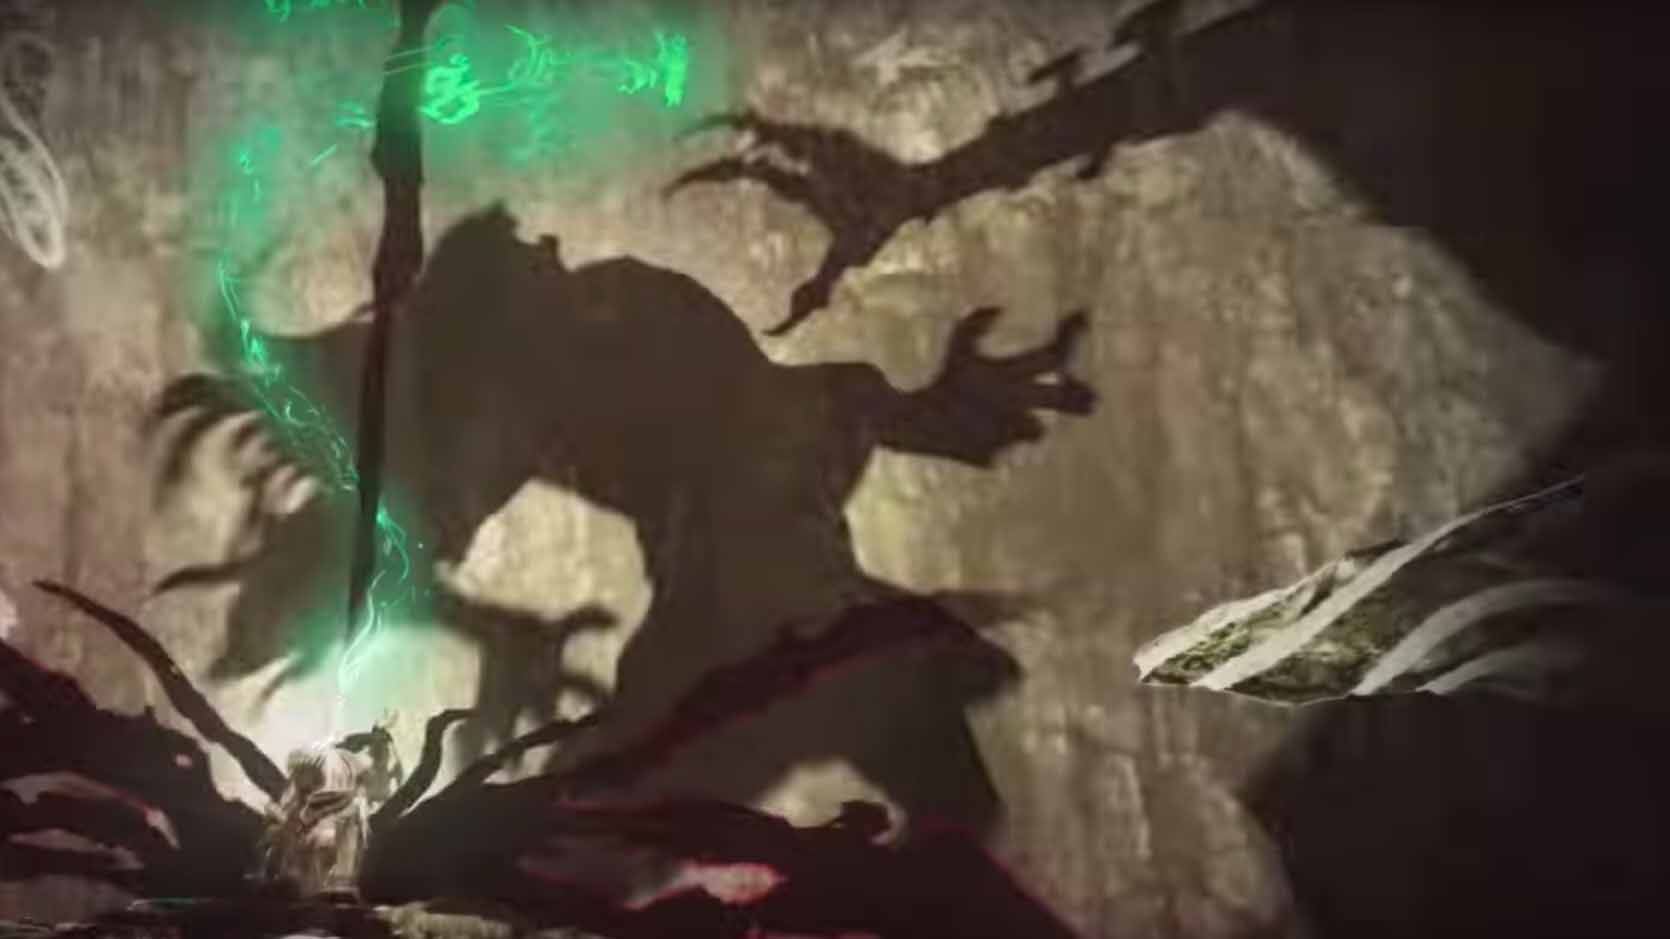 Breath of the Wild 2 trailer screenshot showing a mysterious shadow